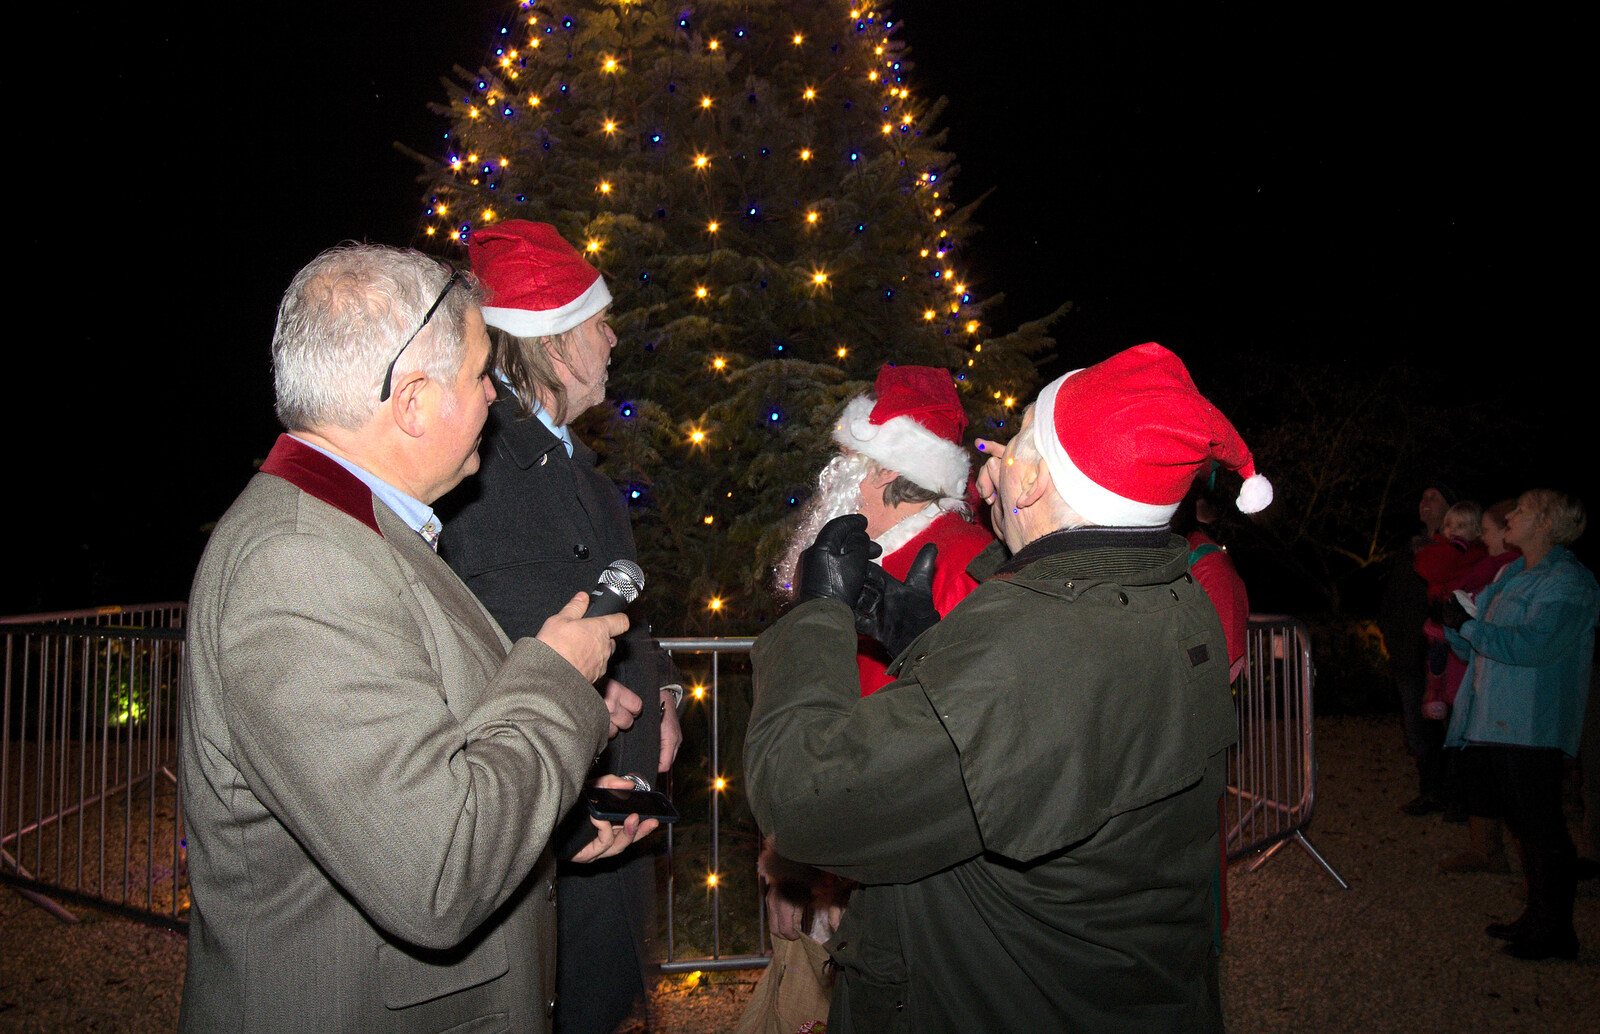 The tree lights up from Rick Wakeman, Ian Lavender and the Christmas lights, The Oaksmere, Suffolk - 4th December 2014